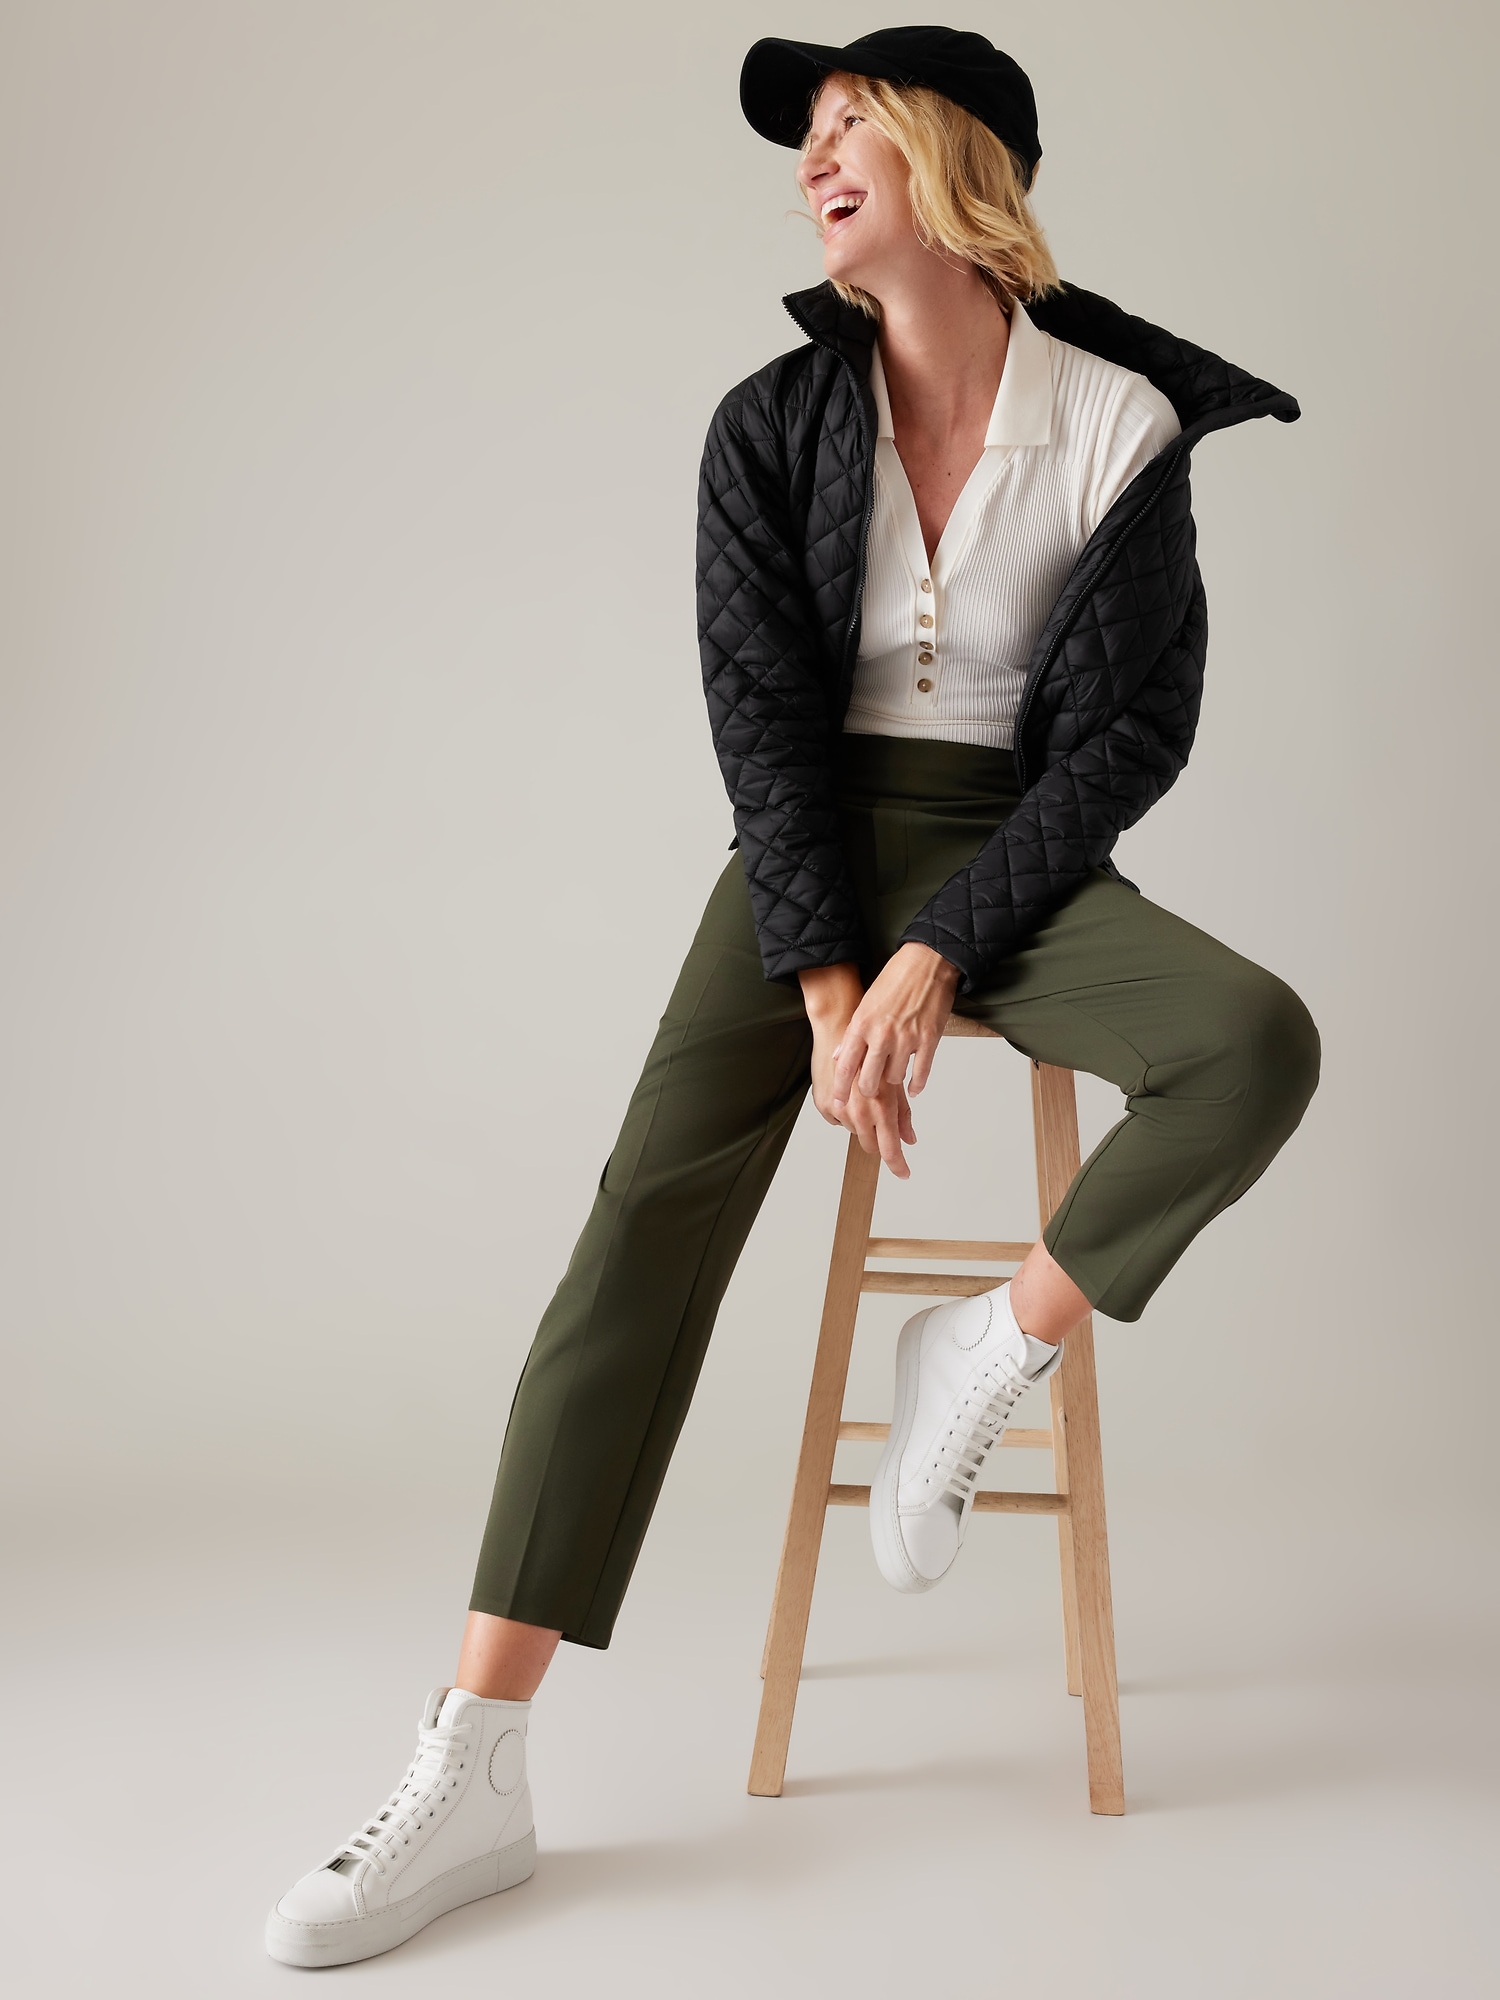 Invest in yourself with the @Athleta endless pant. Shop Ibotta Days an